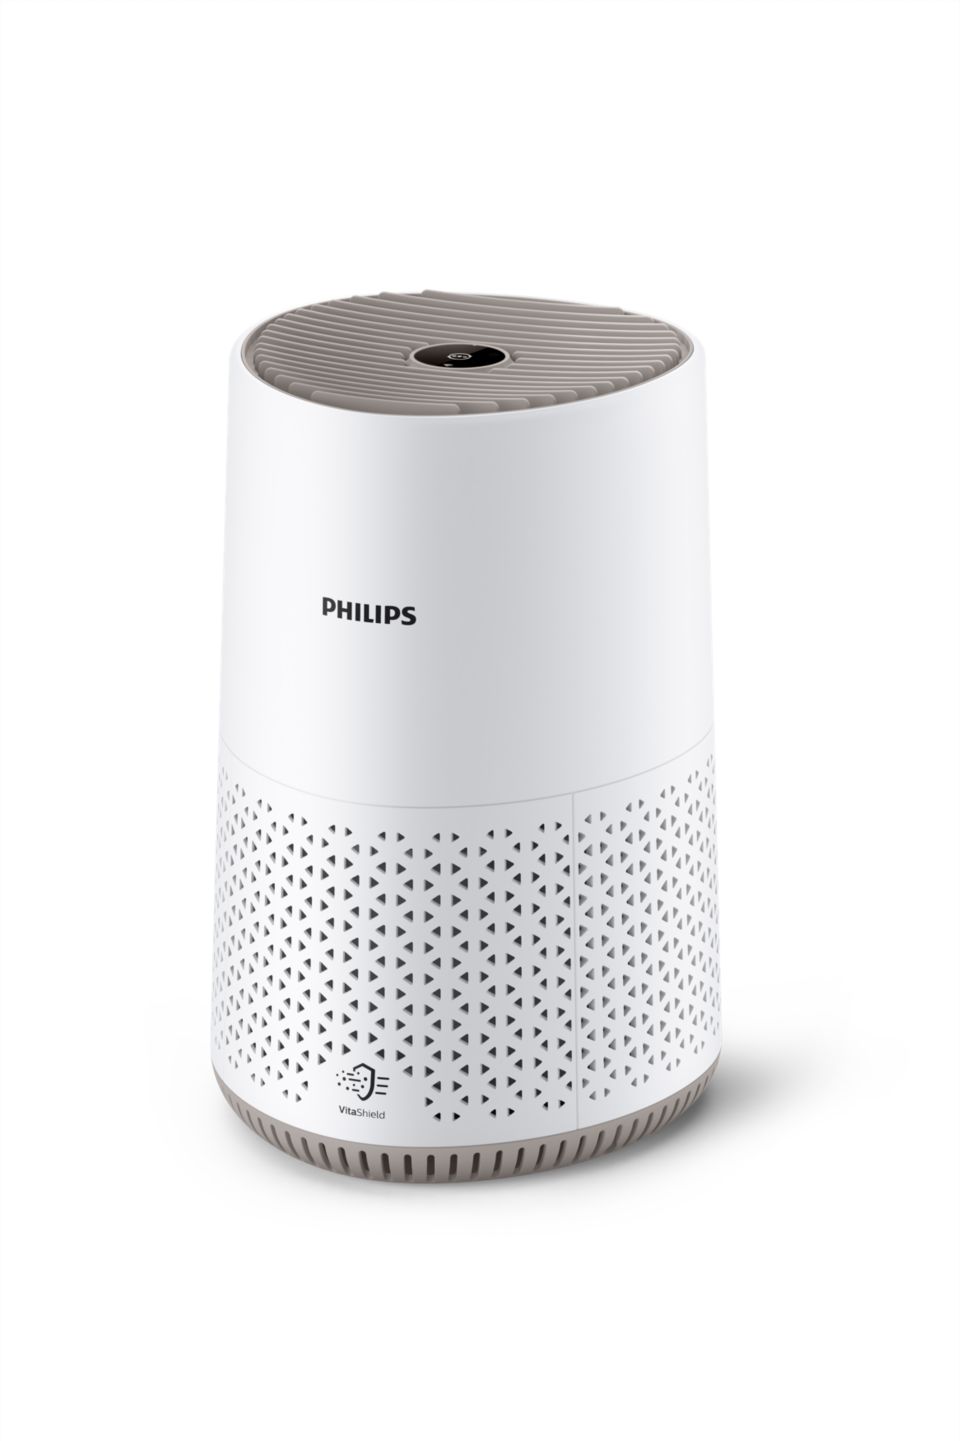 https://images.philips.com/is/image/philipsconsumer/66a54dcf72204bc5b05faf6d007a0904?$jpglarge$&wid=960